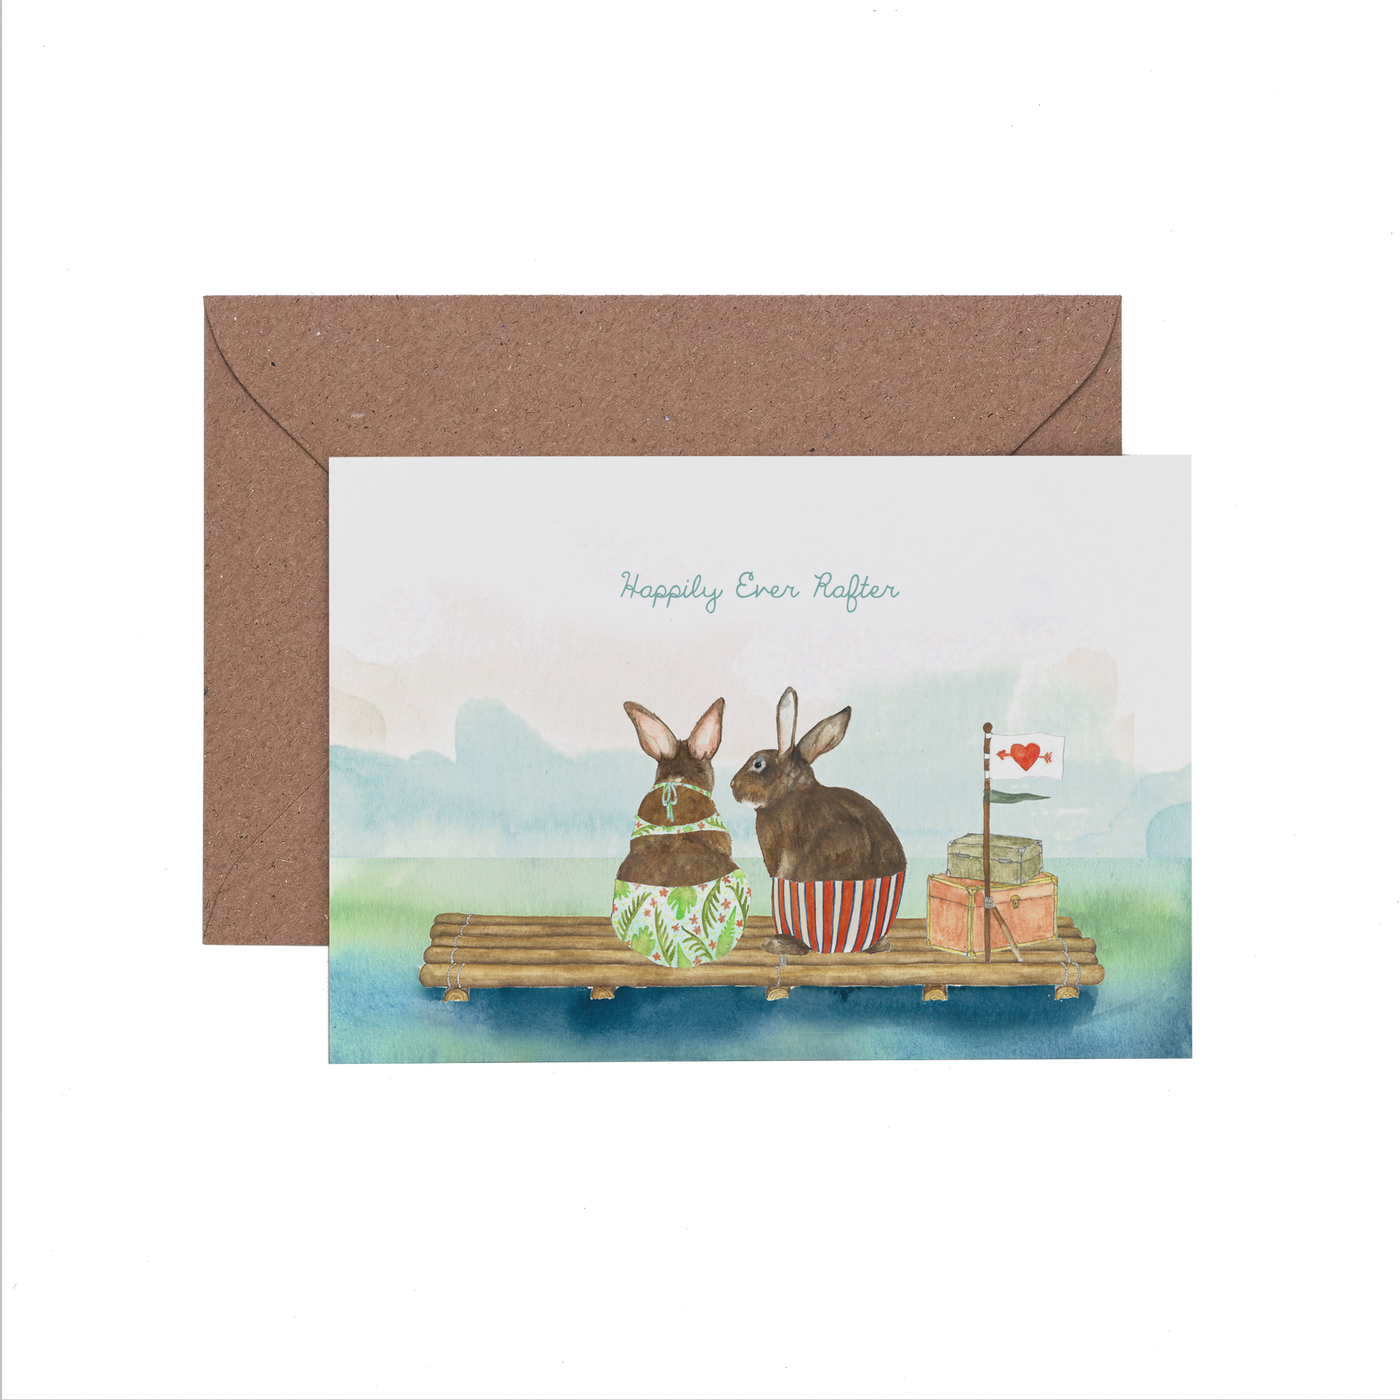 Happily Ever Rafter Wedding card